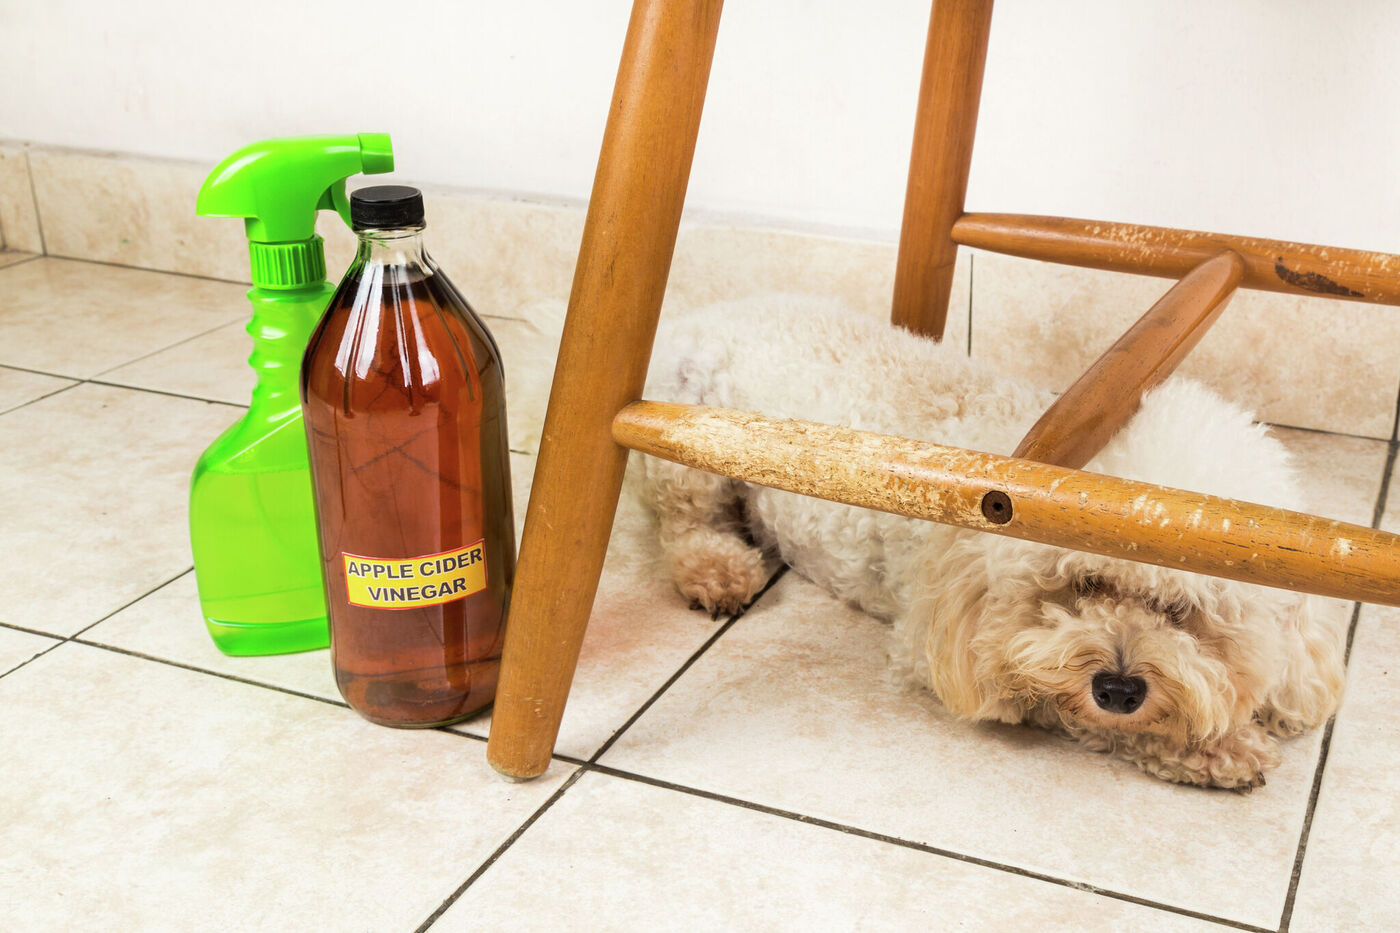 How Much Apple Cider Vinegar Should I Put In My Dog’s Water To Help With Fleas